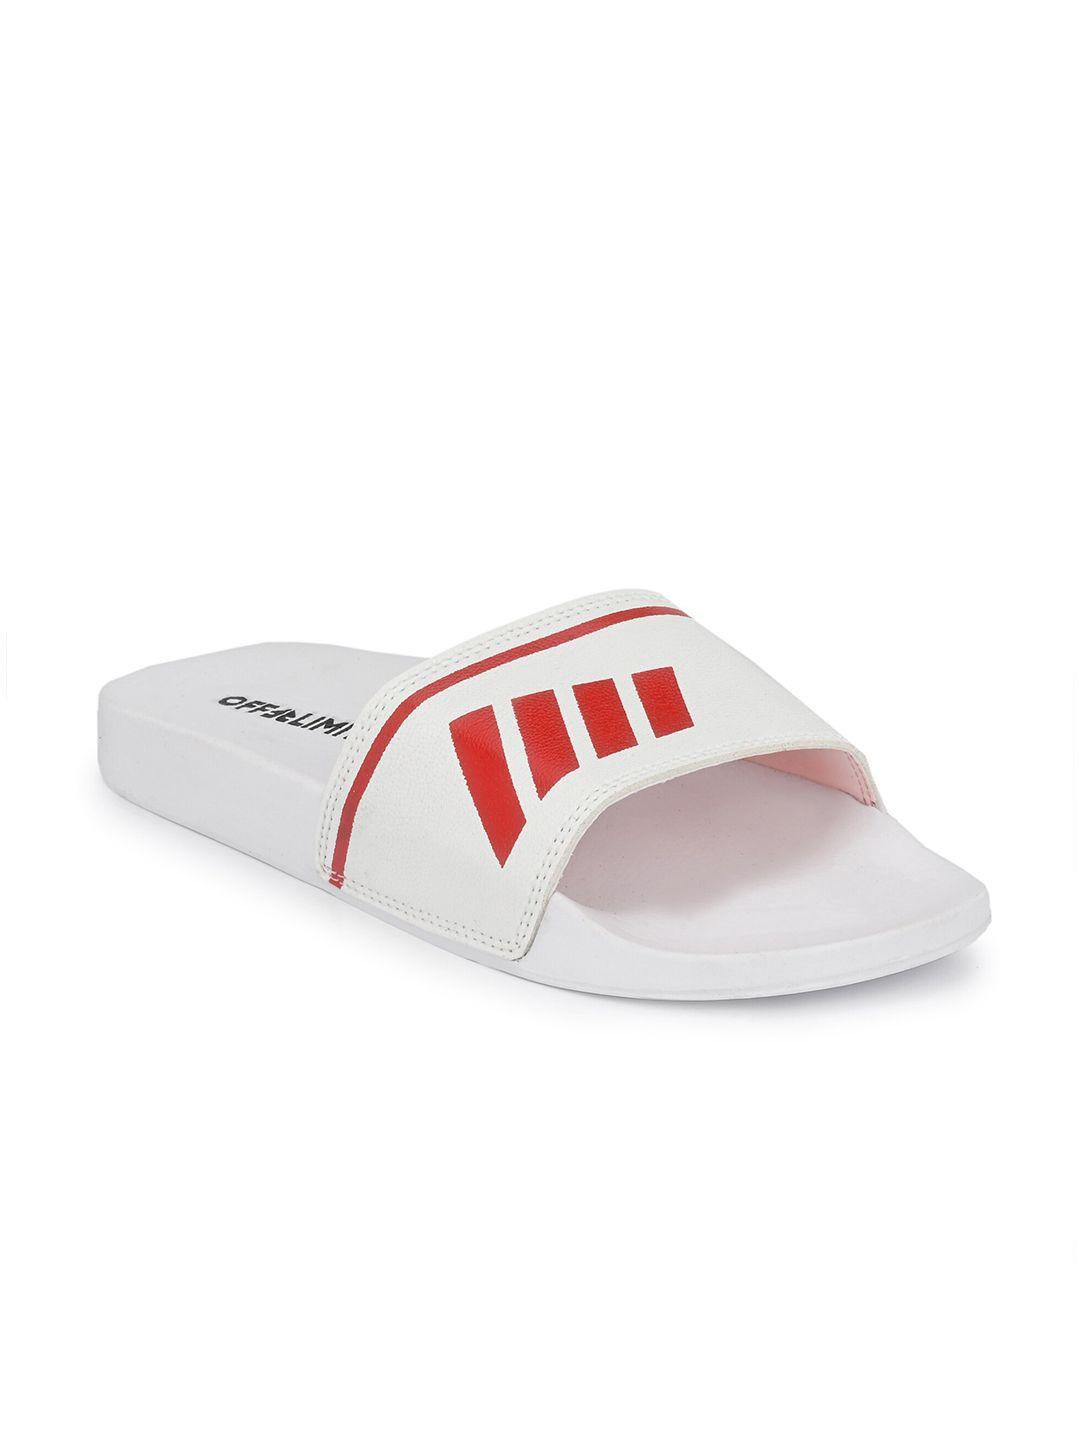 off-limits-women-white-&-red-sliders